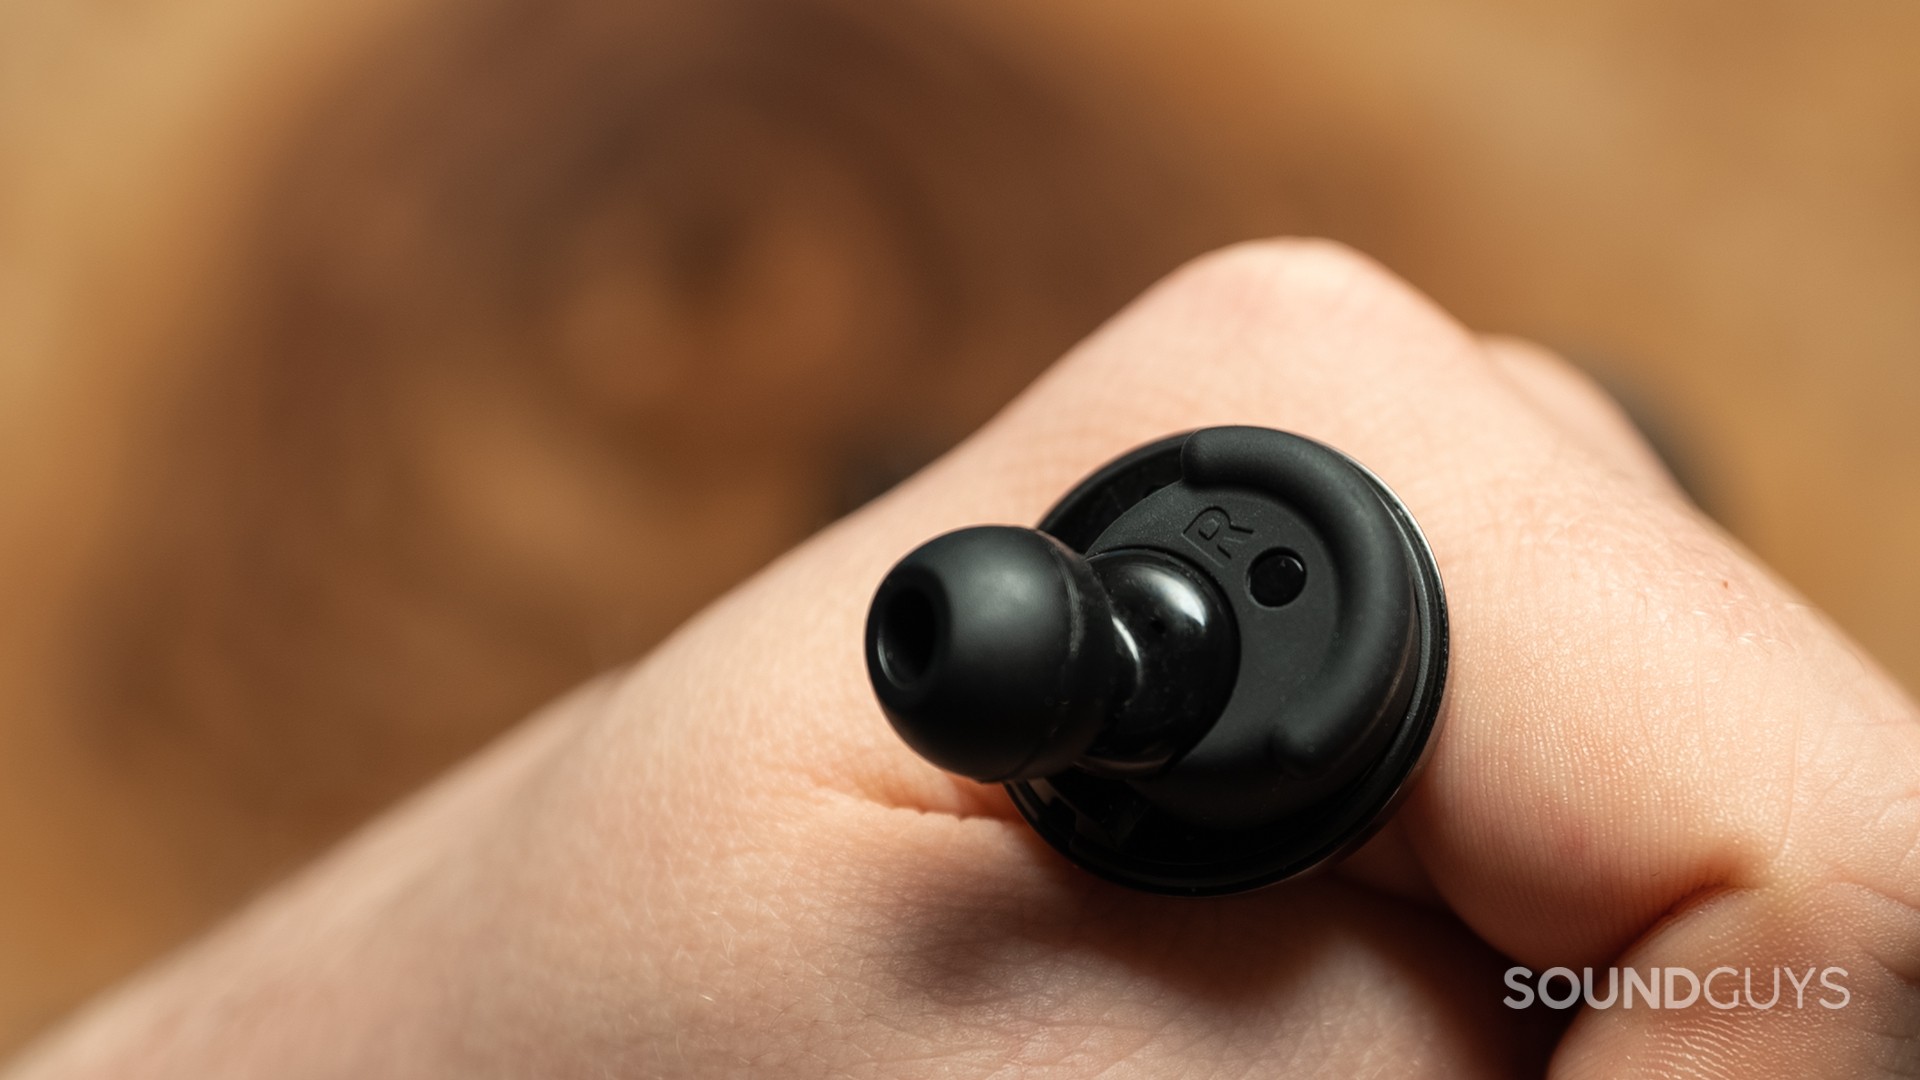 A photo of the Denon PerL Pro on someone's hand, with ear sensor visible.